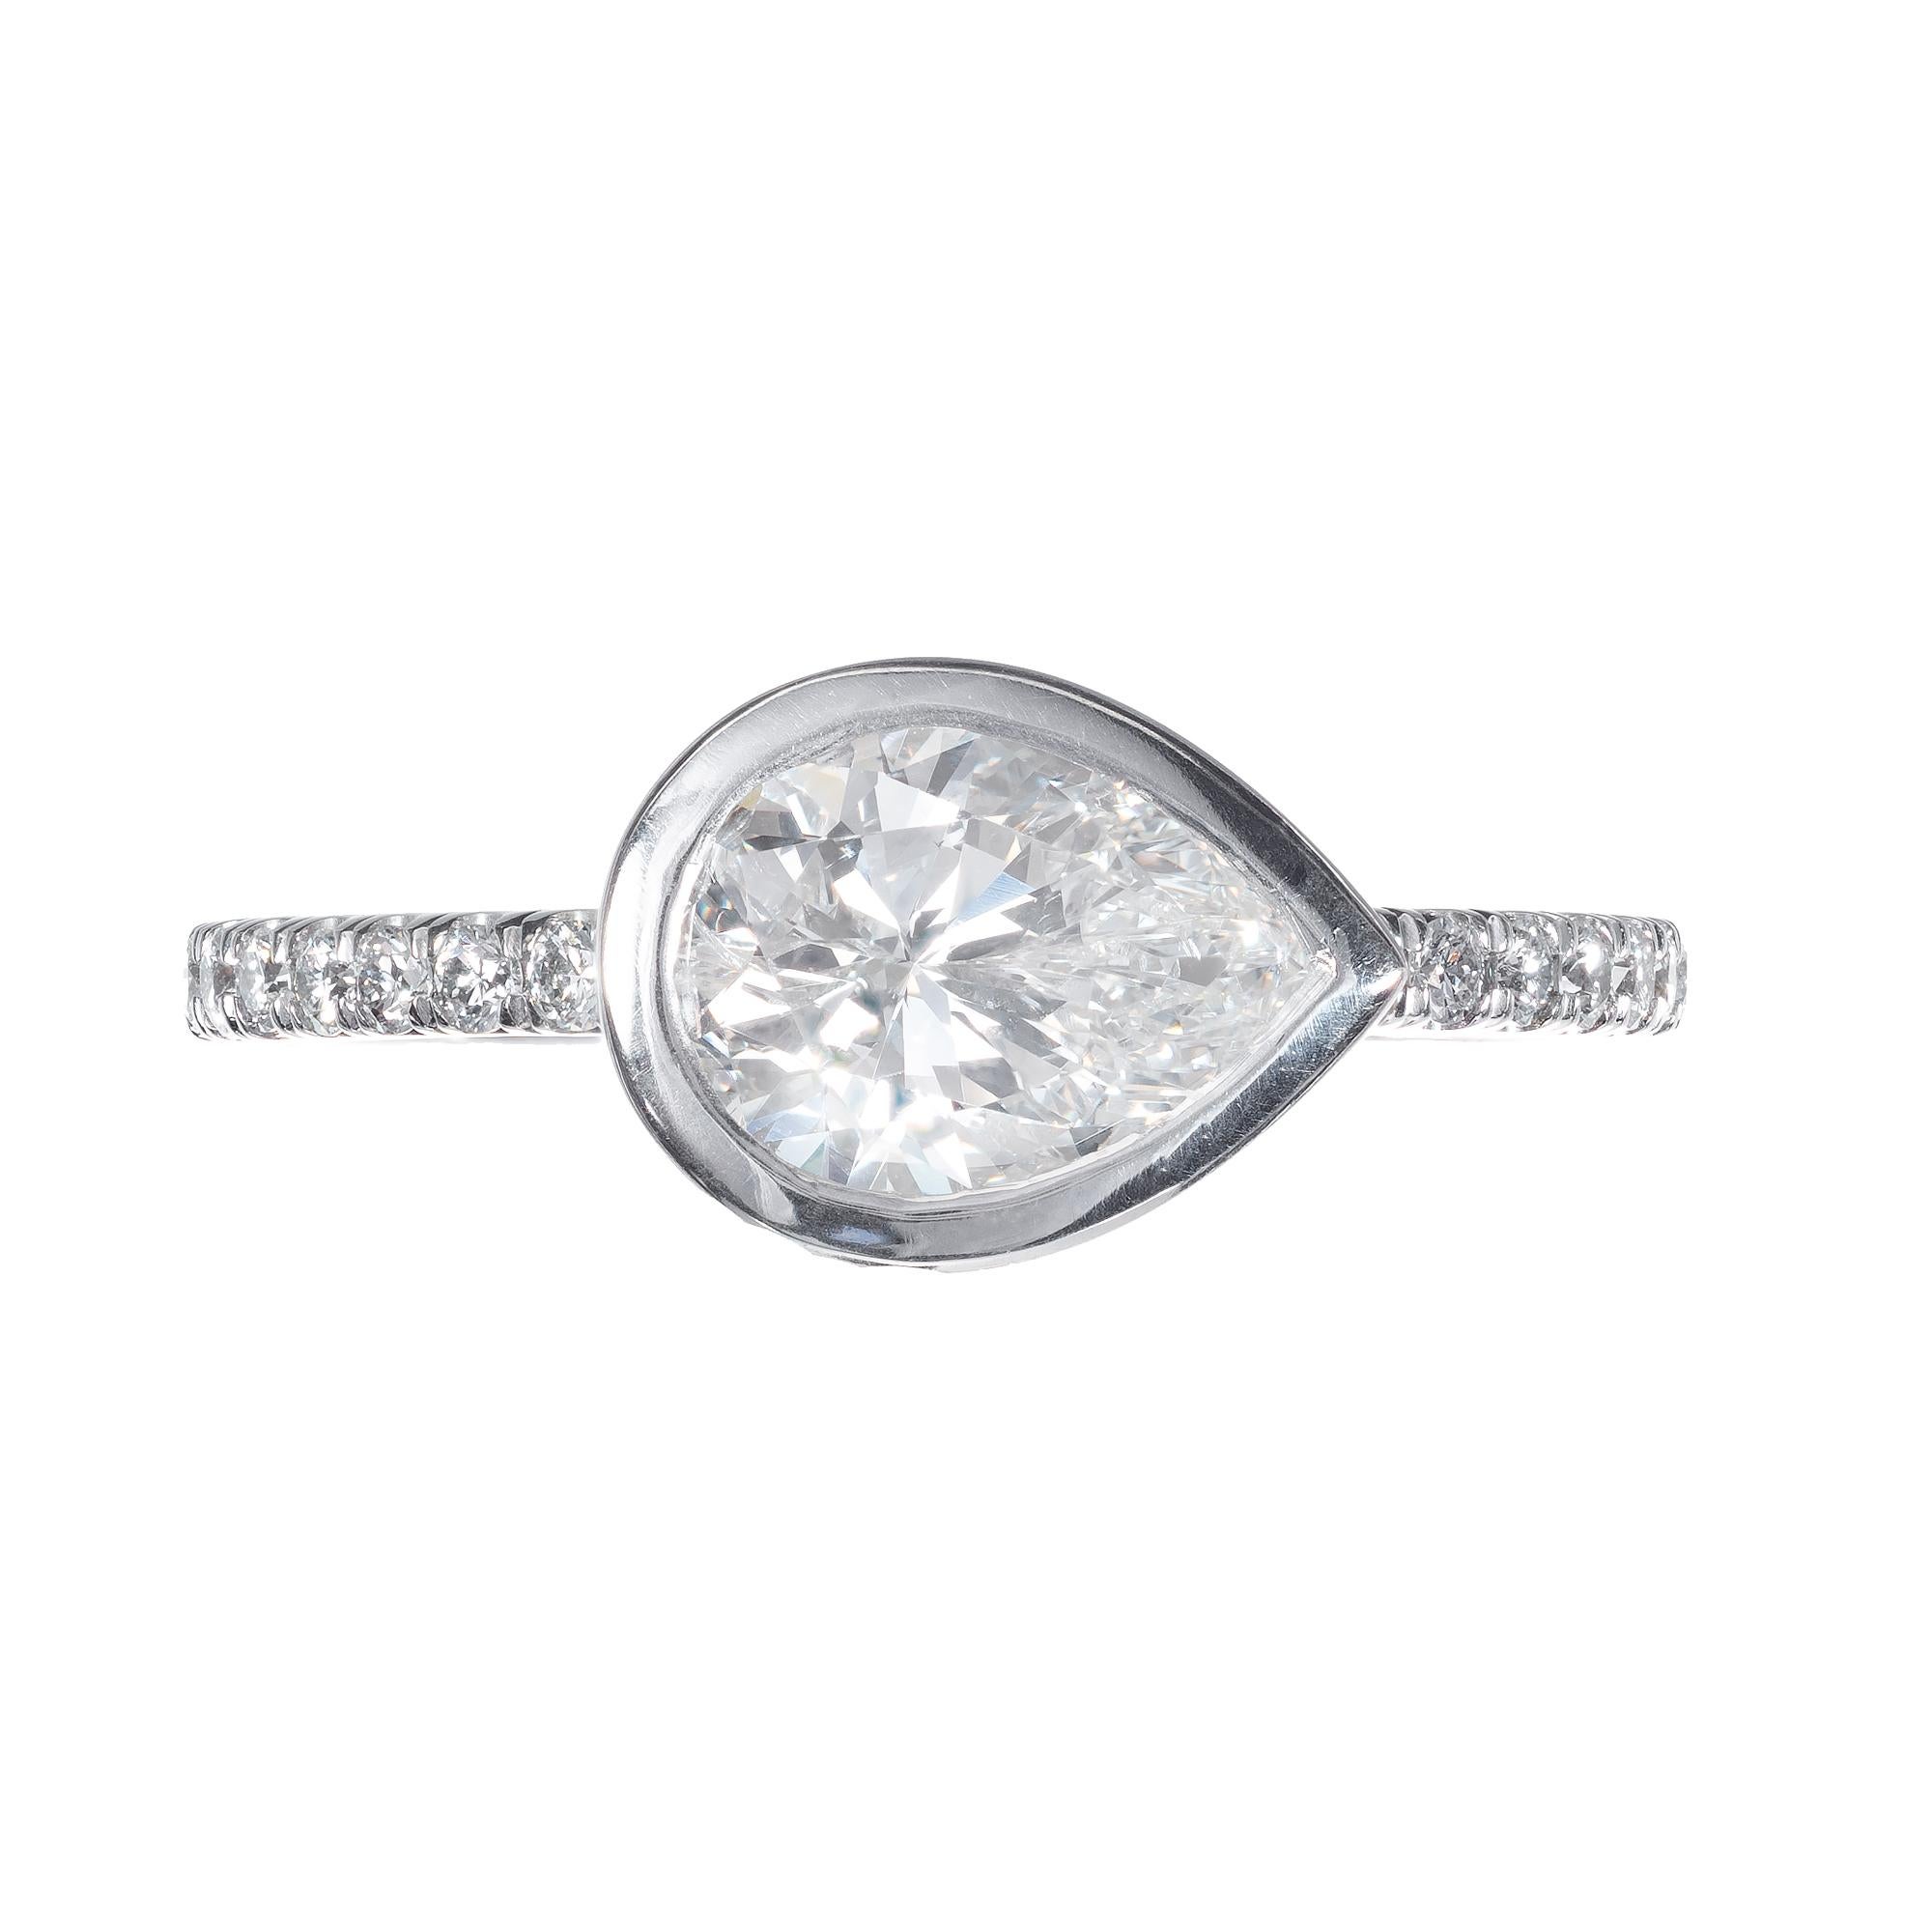 Pear shaped diamond engagement ring. Bezel side set pear shaped center stone in a platinum setting with round accent diamonds, from the Peter Suchy Workshop.

1 pear shaped F SI2 diamond, Approximate 1.27cts GIA Certificate #5181226671
16 round